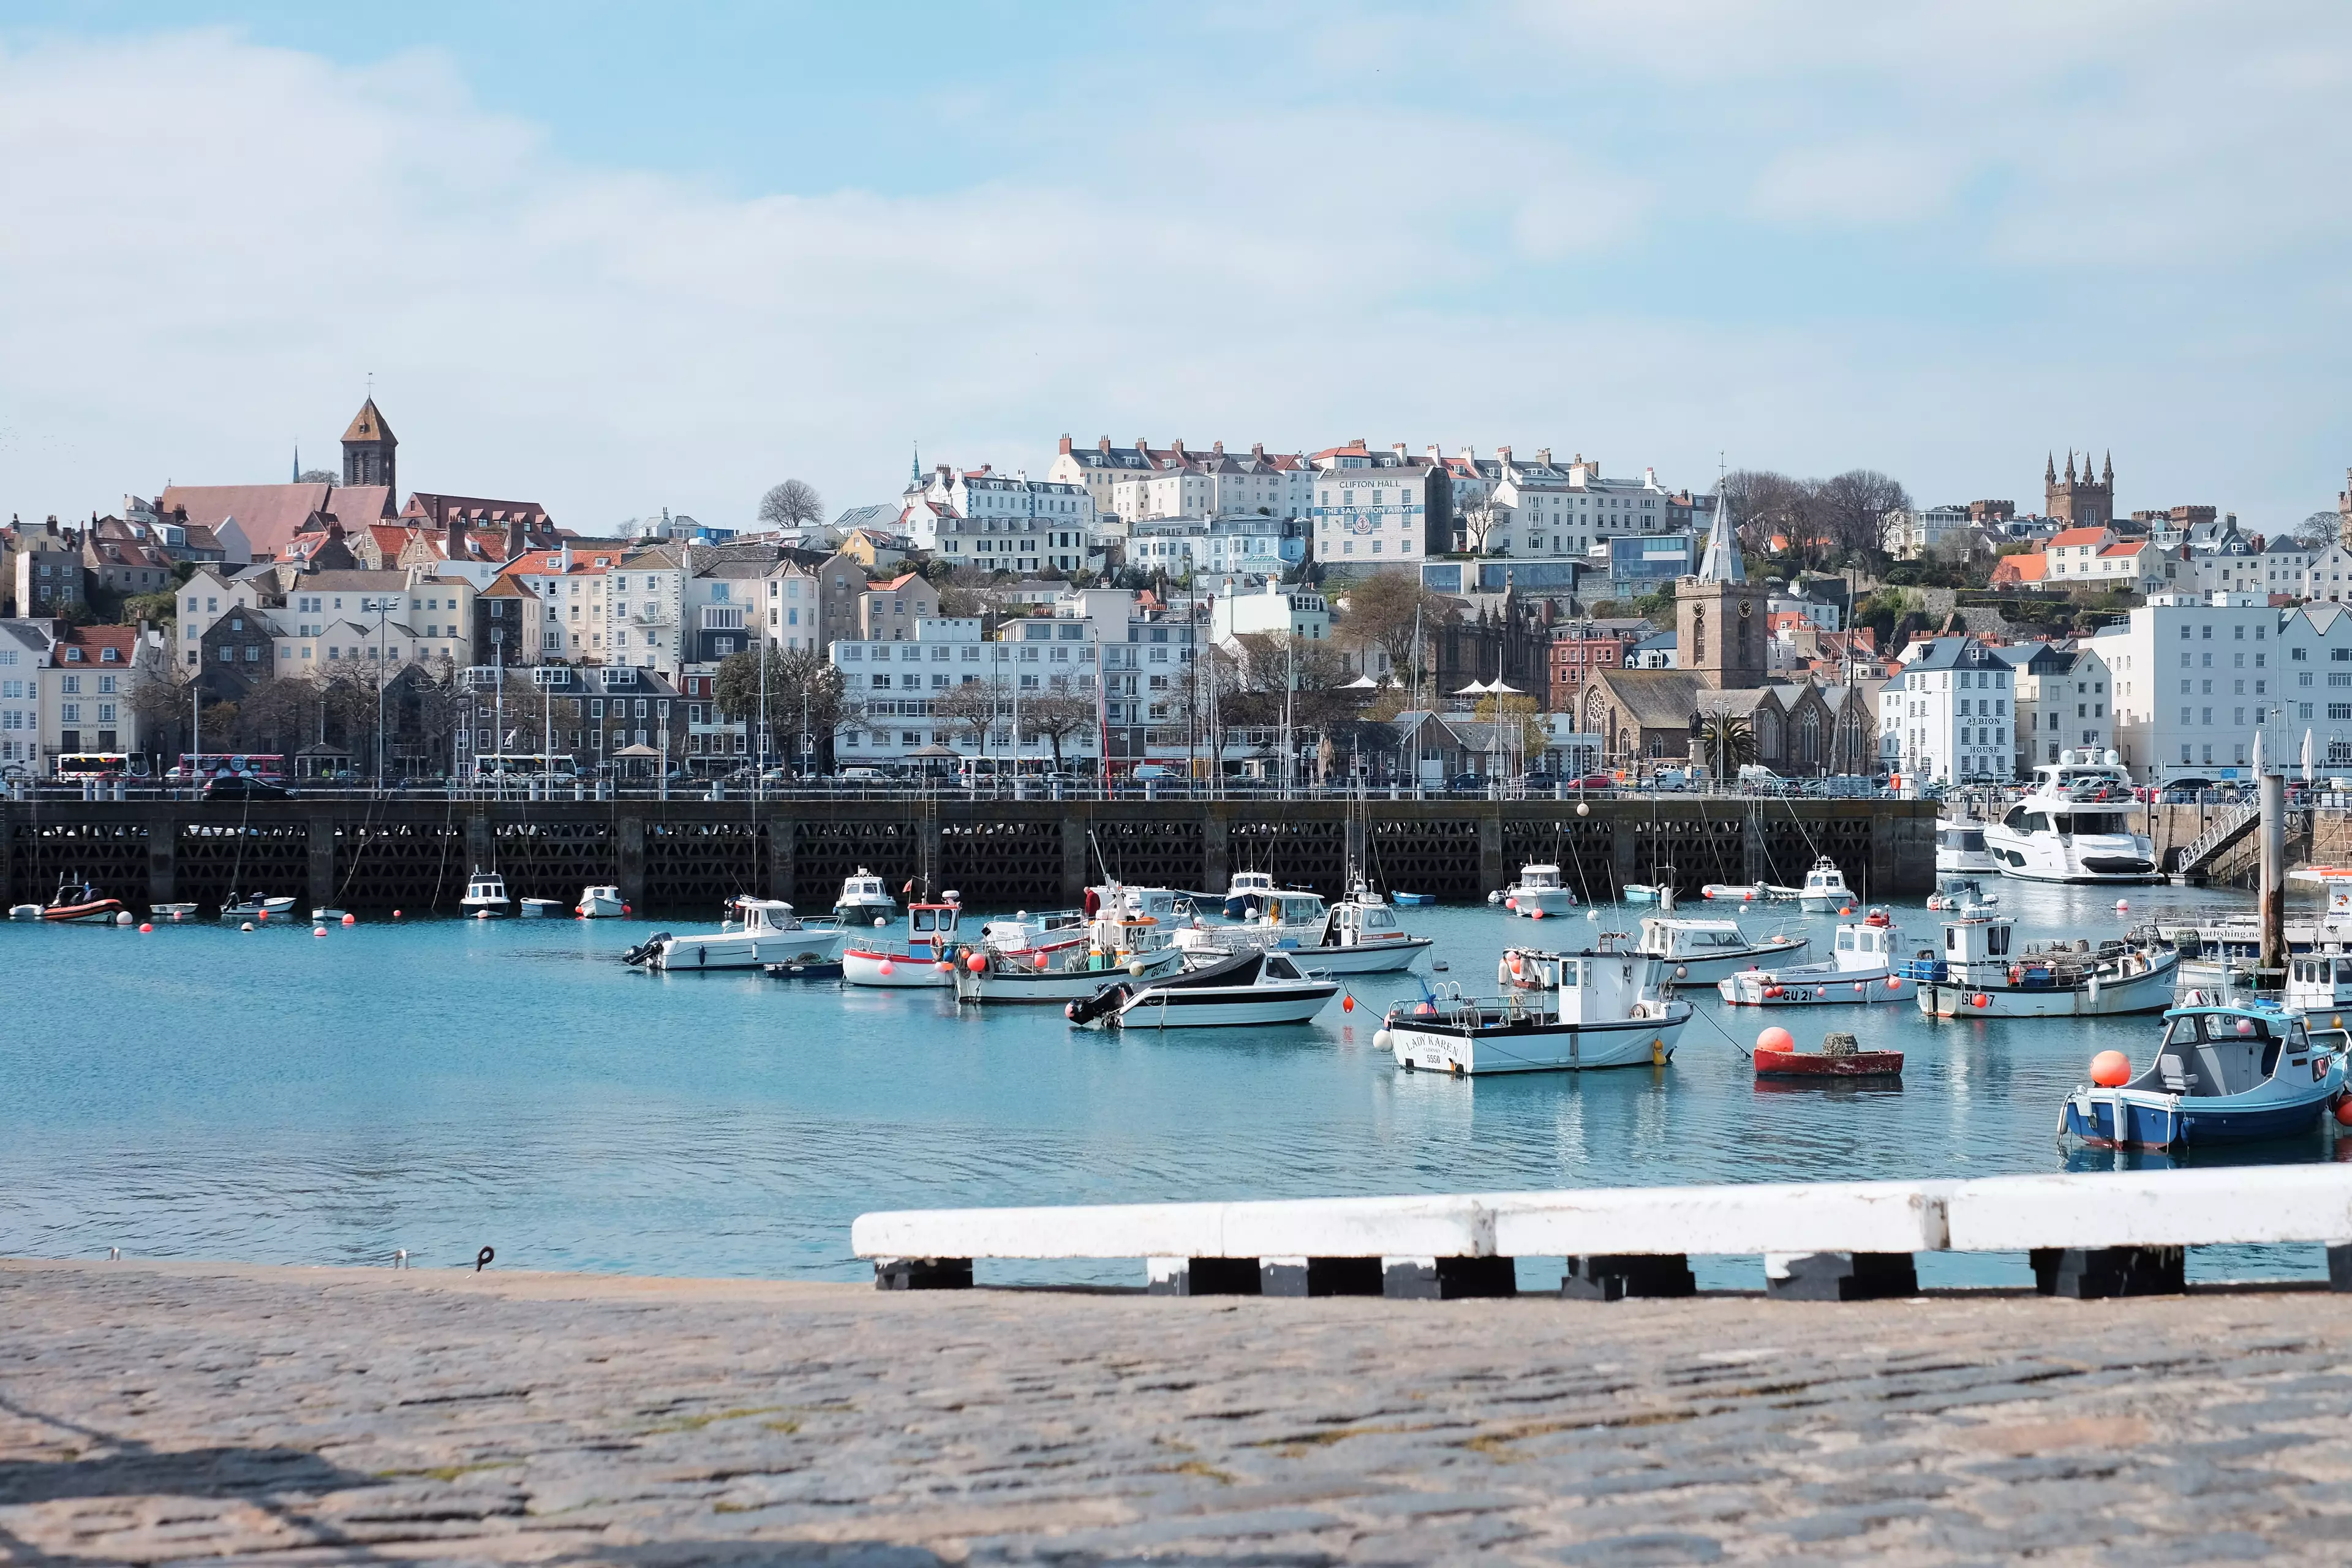 St Peter Port in Guernsey (